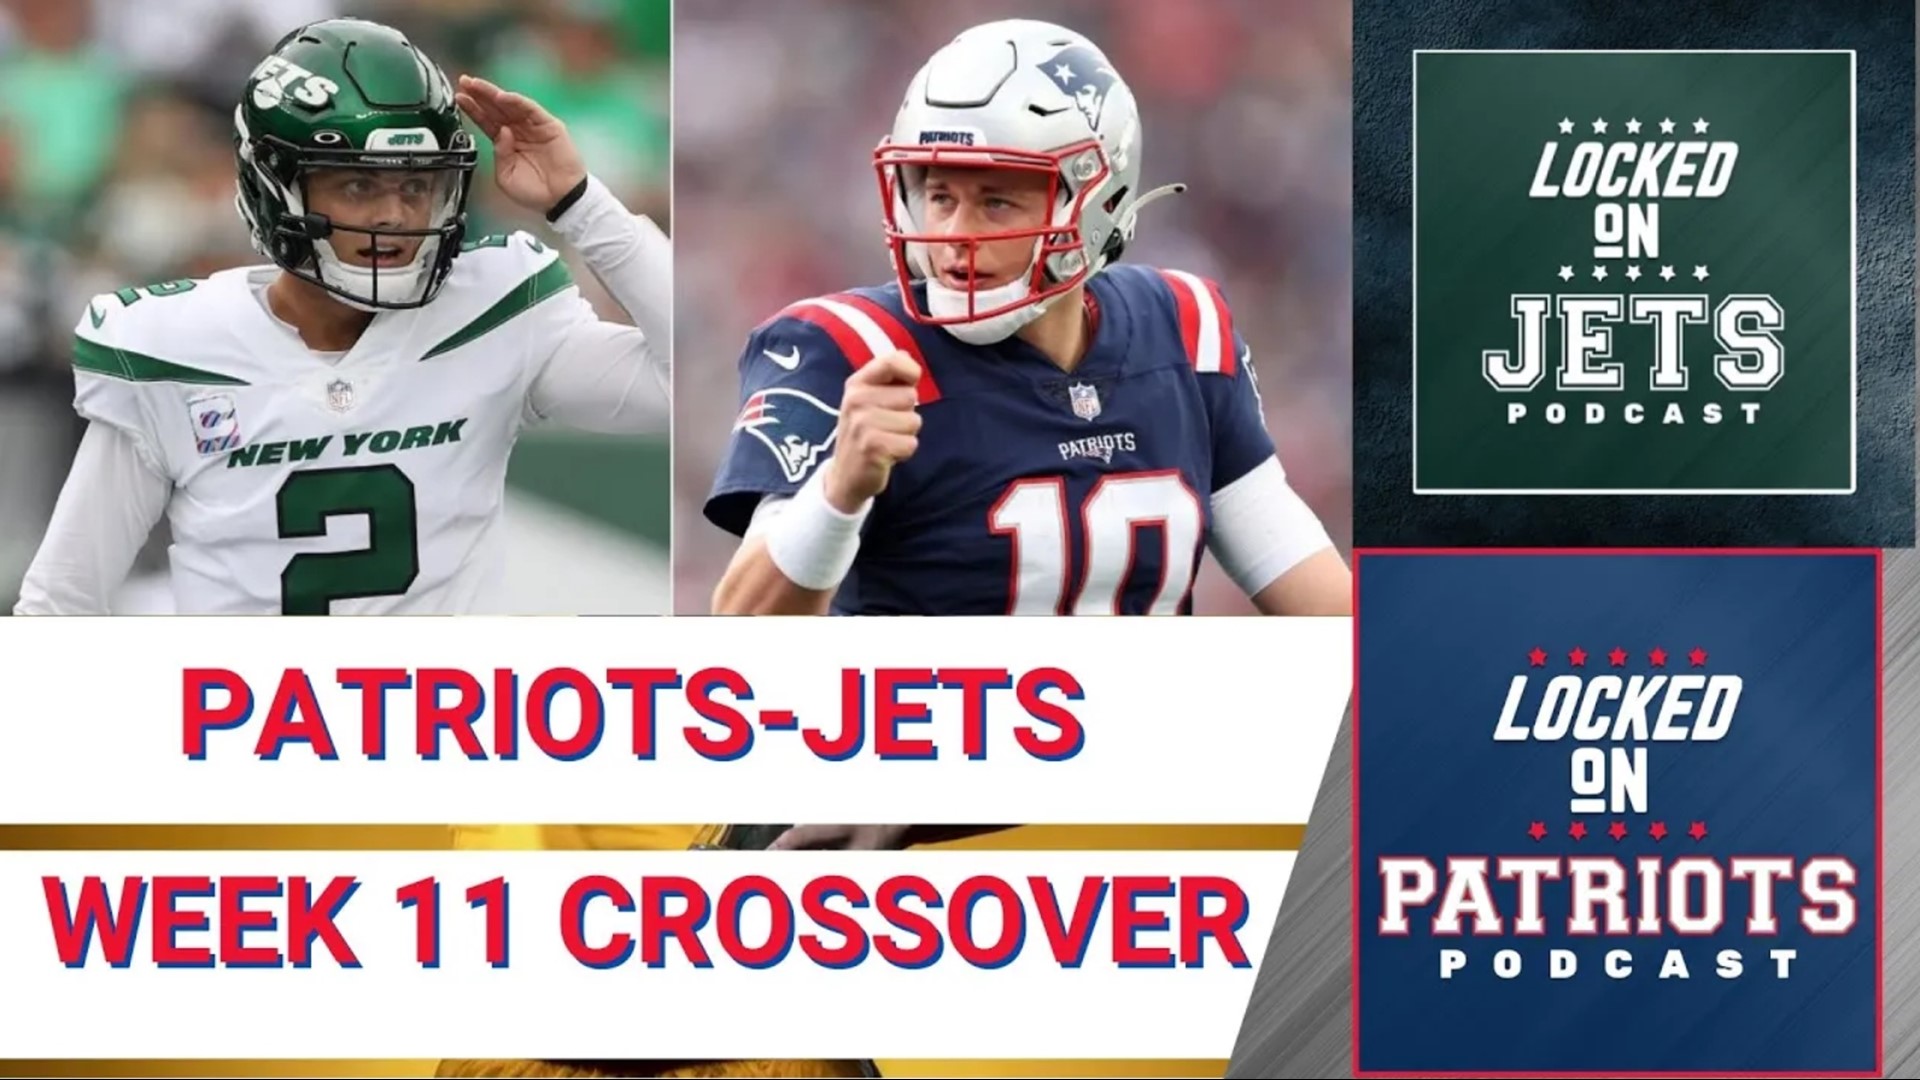 Join hosts Mike D’Abate of Locked On Patriots and John Butchko of Locked On Jets as they preview this Sunday’s showdown.